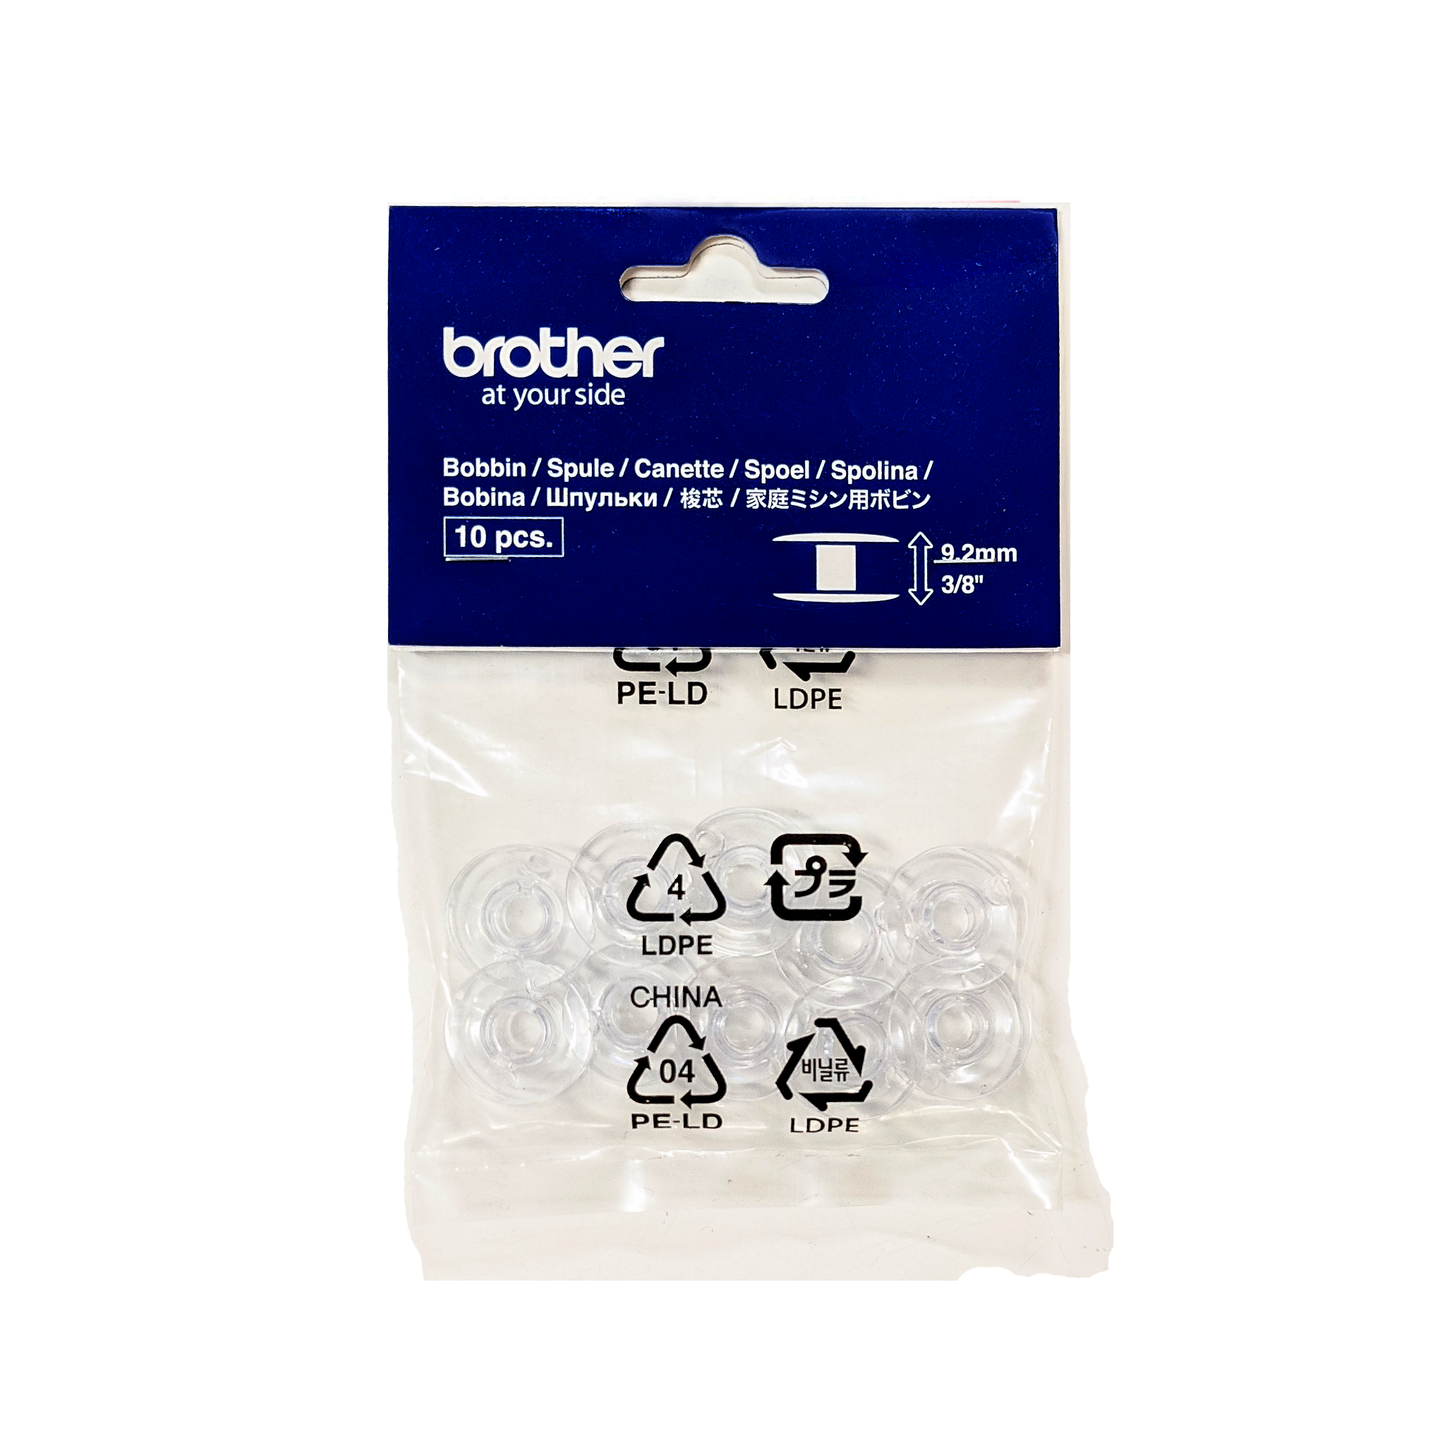 Brother Bobbins for Sewing Machines – Bobbin and Ink